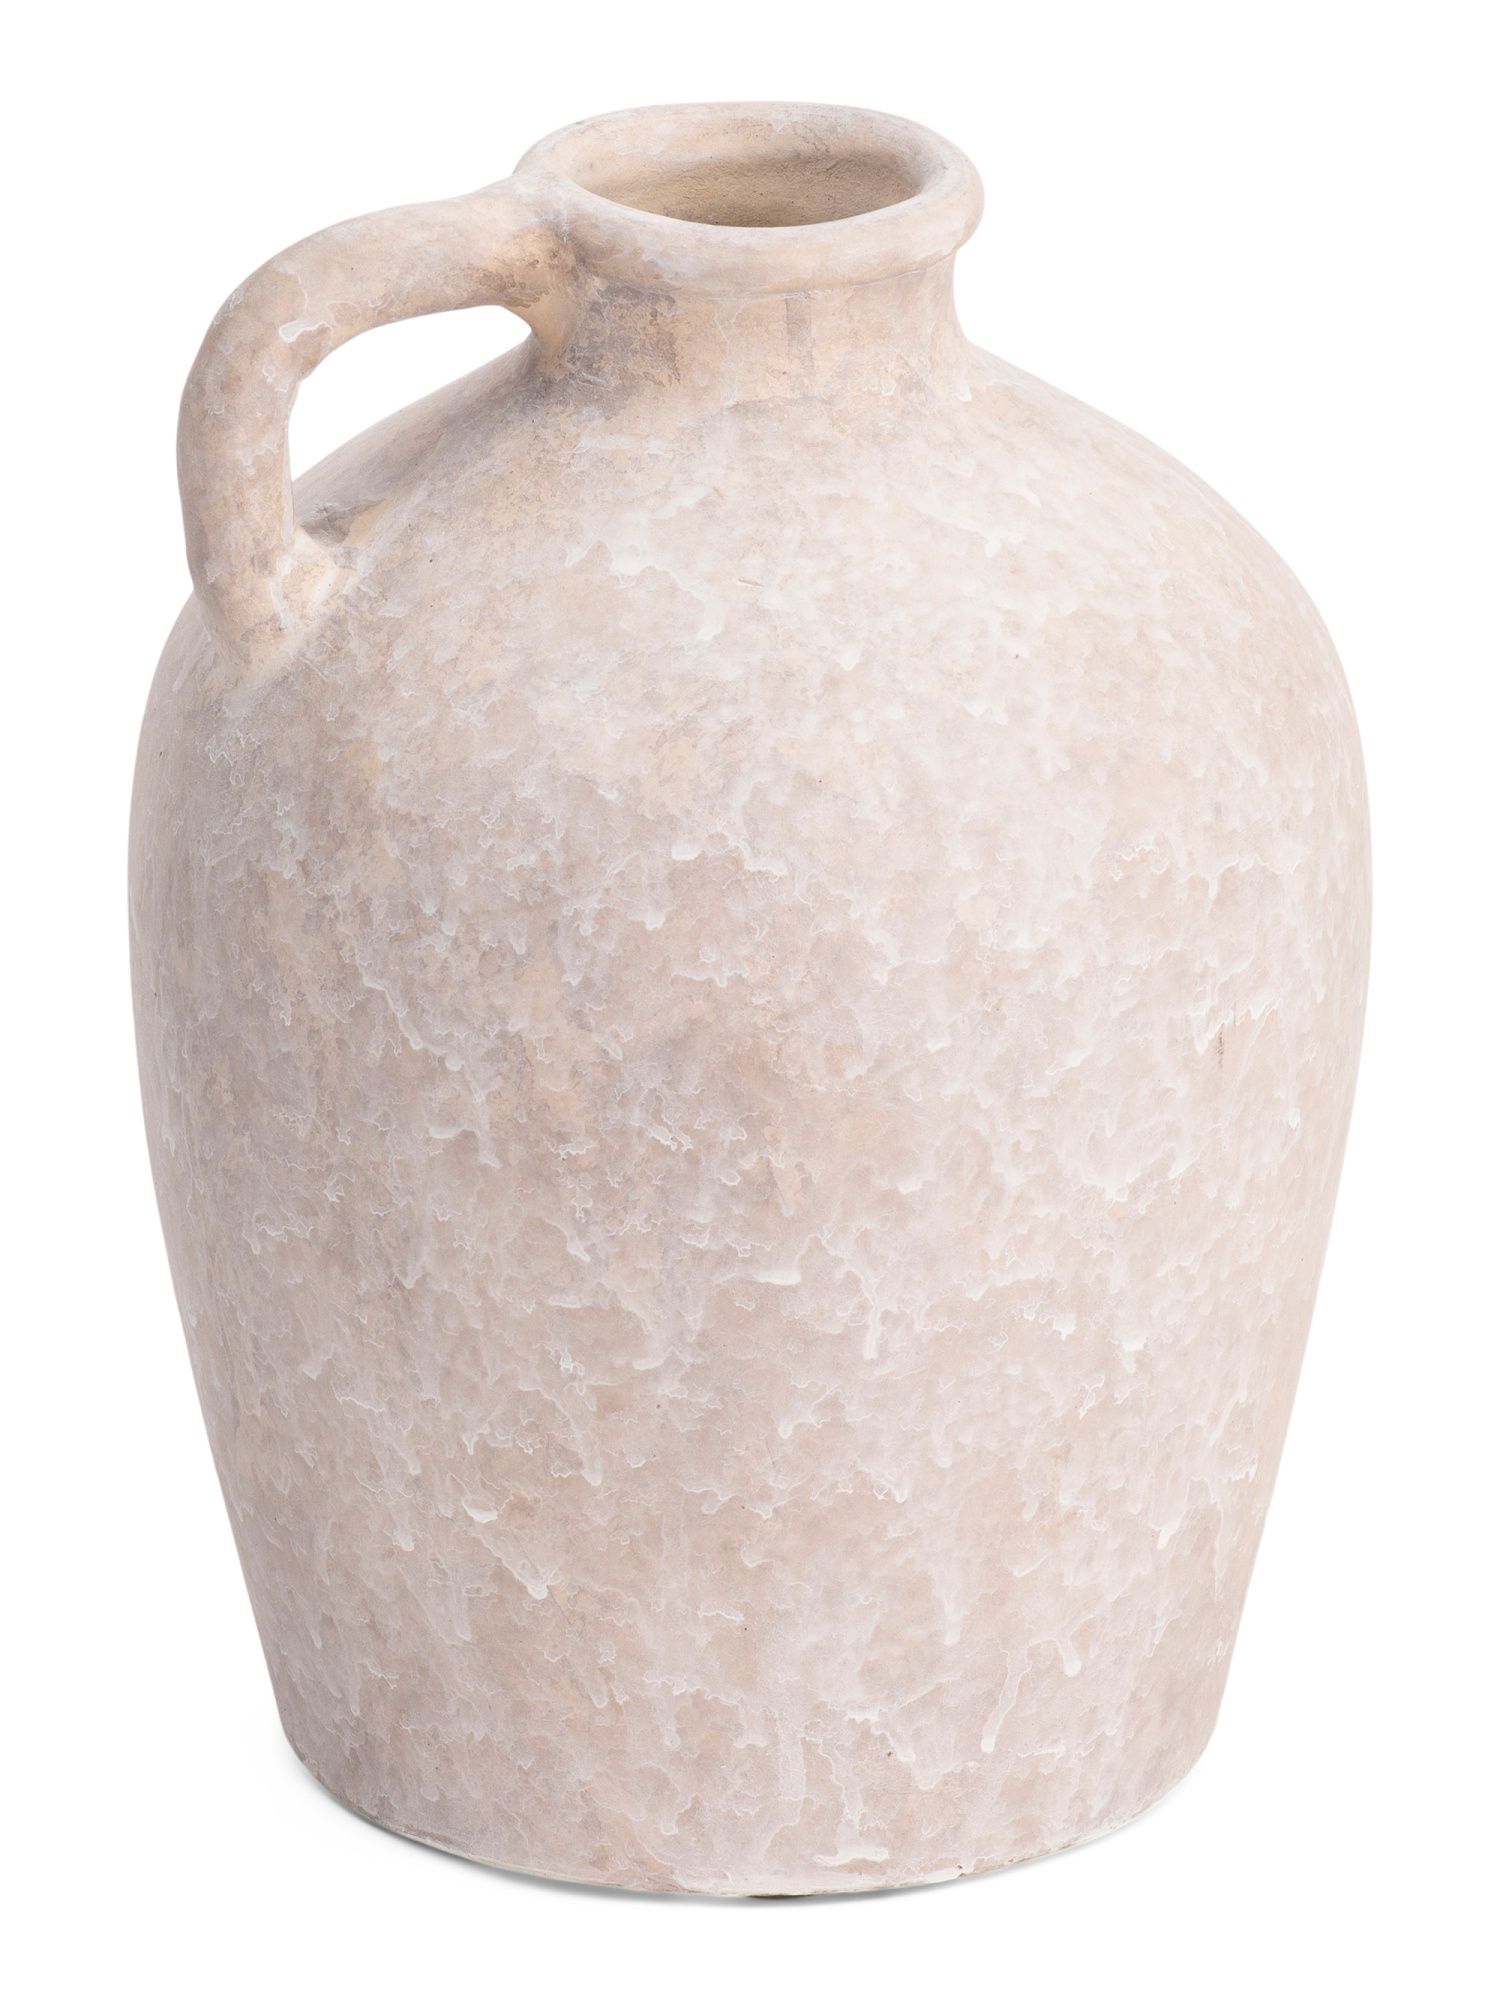 10in Terracotta Vase With Handle | TJ Maxx